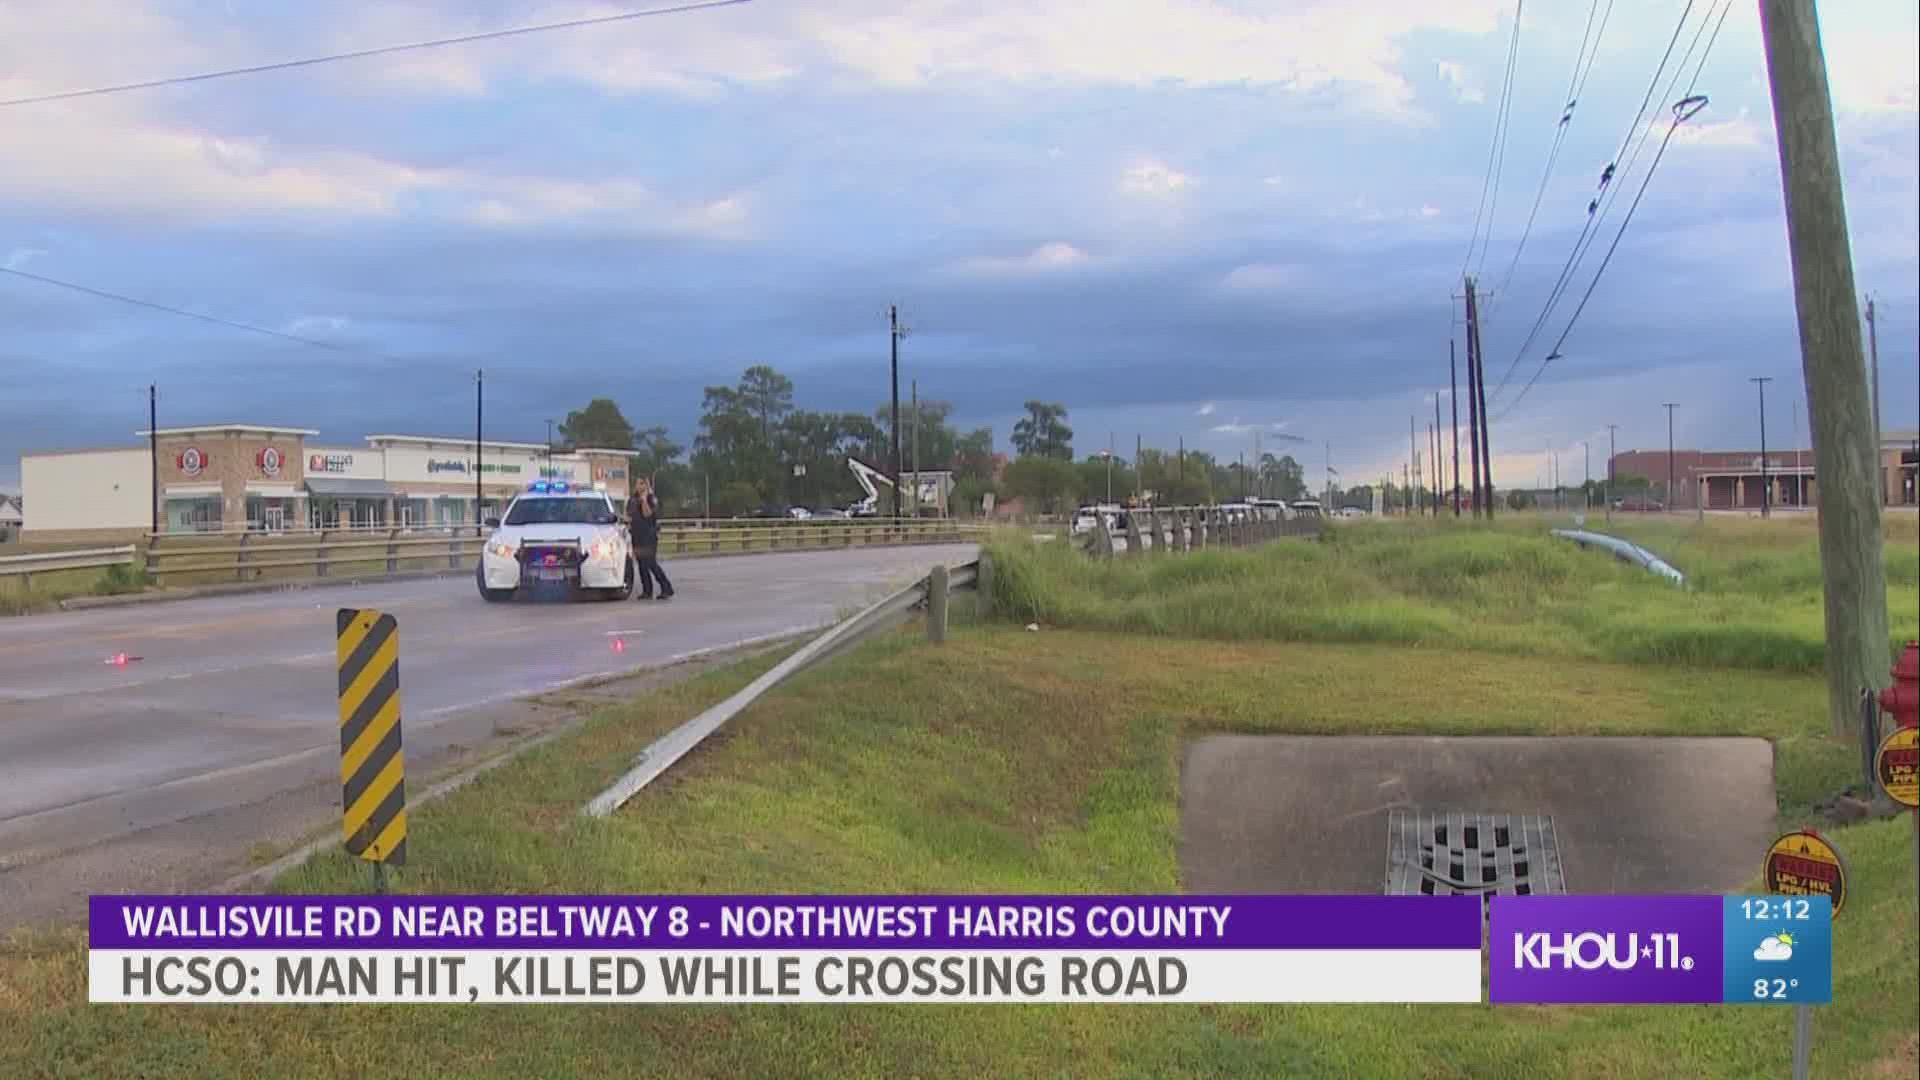 A 65-year-old man died after he was hit by a pickup truck while crossing the roadway in northeast Harris County Thursday morning, according to Sheriff Ed Gonzalez.